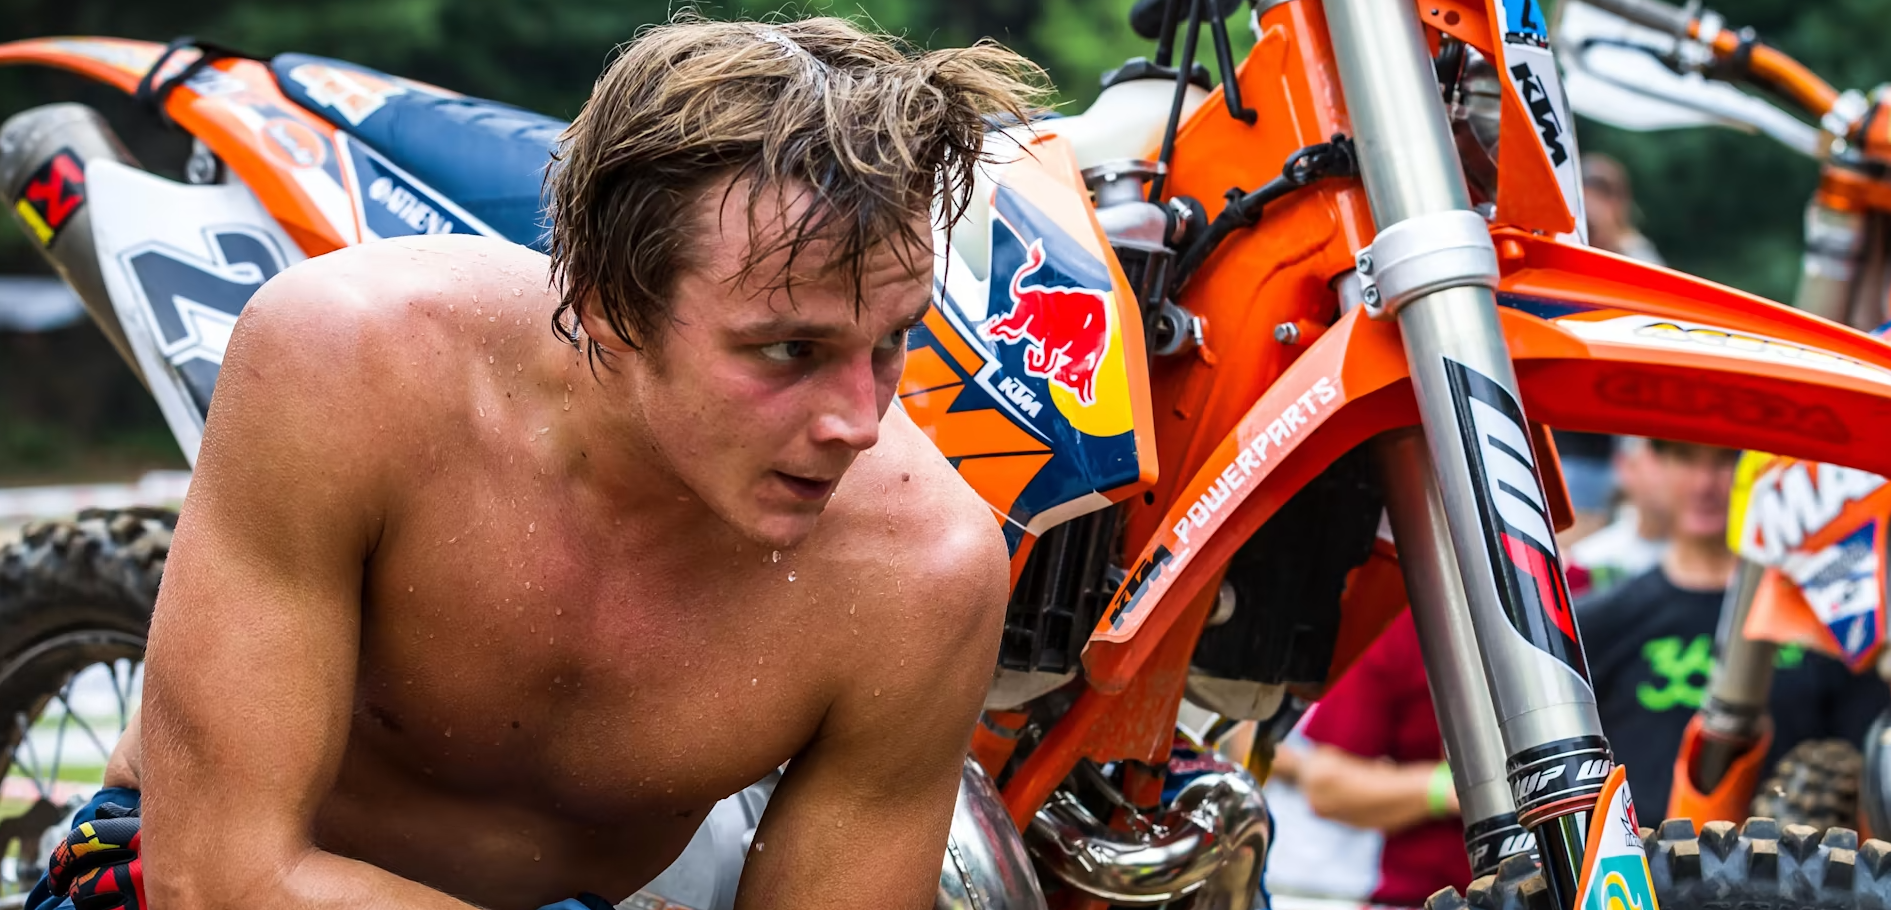 Professional Hard enduro rider, Johnny walker profusely sweating after a training session. Walker sits in front of his ktm dirt bike. 